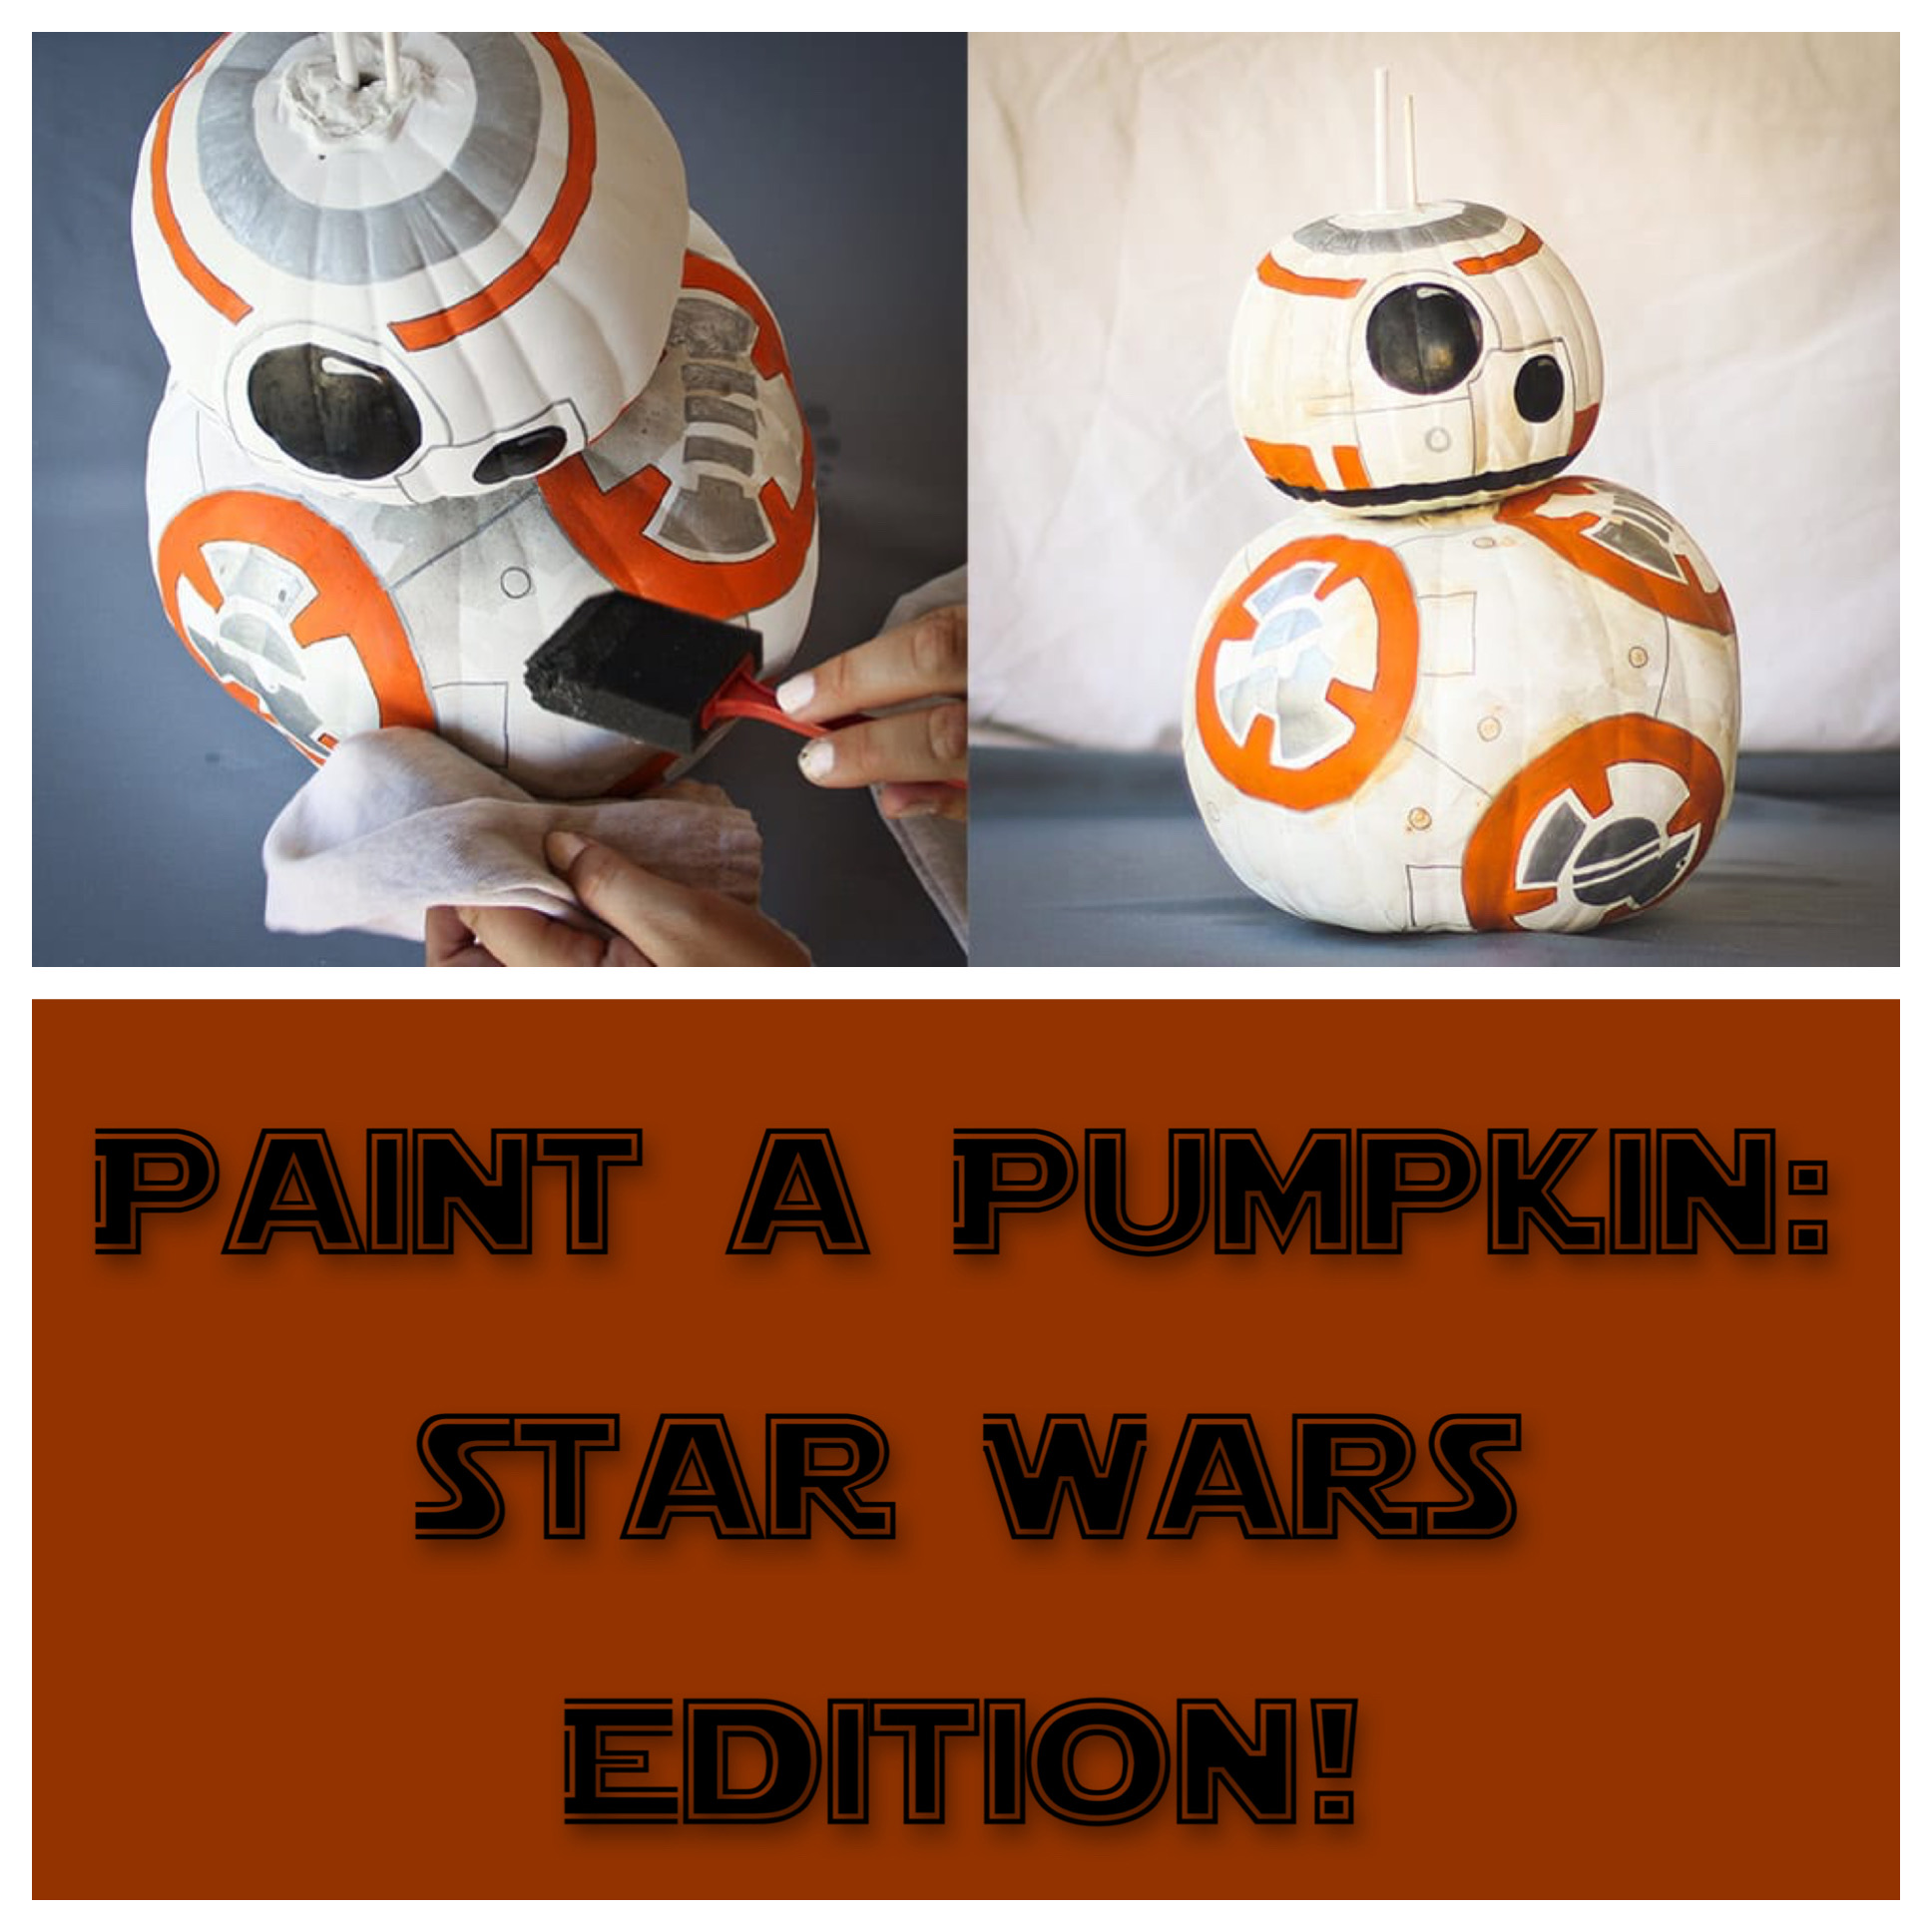 A Paint a Pumpkin  Star Wars Edition experience project by Yaymaker